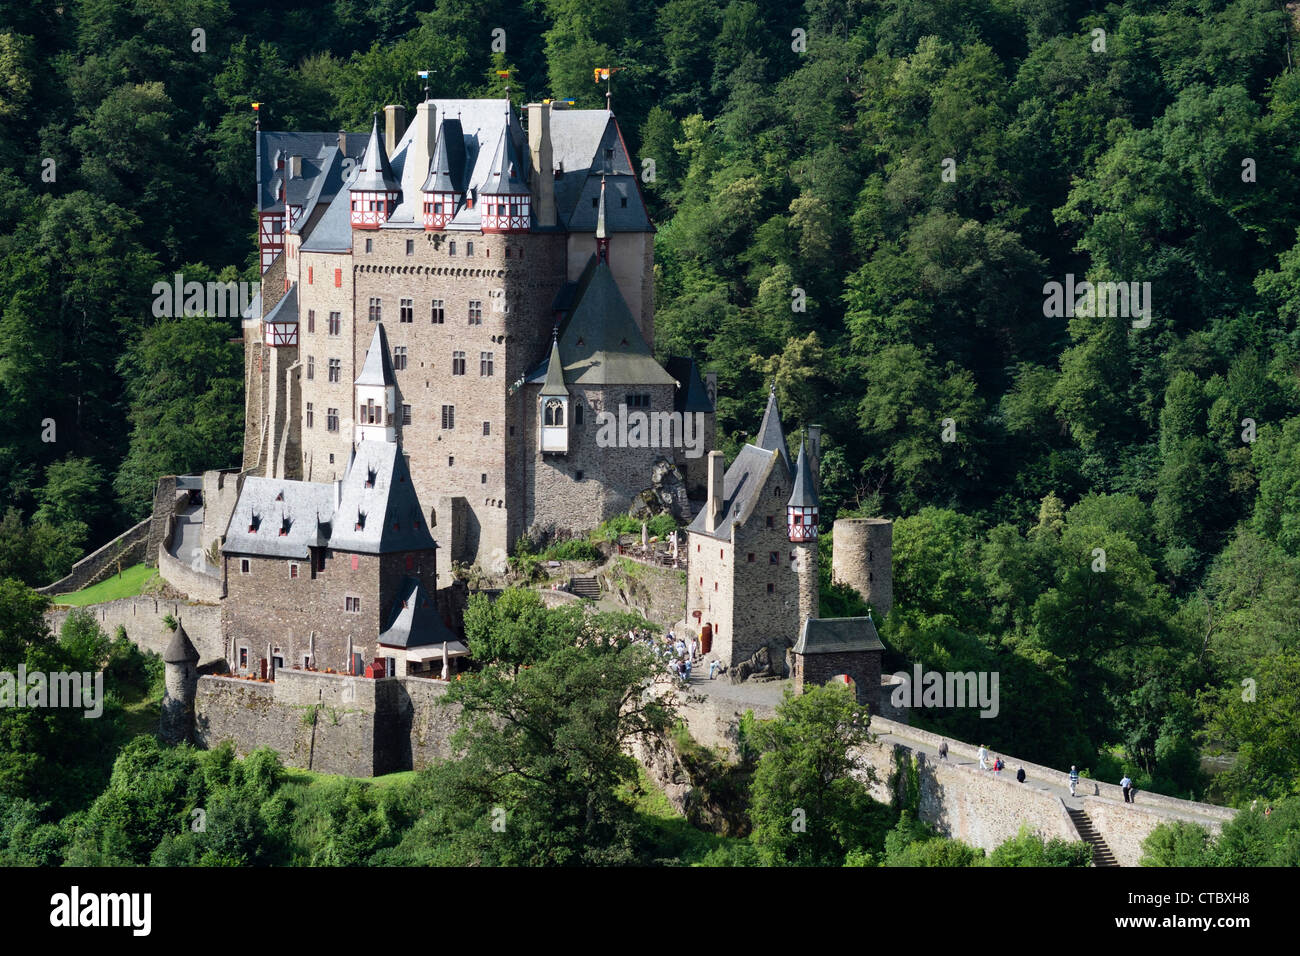 Burg Eltz castle near Mosel River valley in in Rhineland-Palatinate Germany Stock Photo